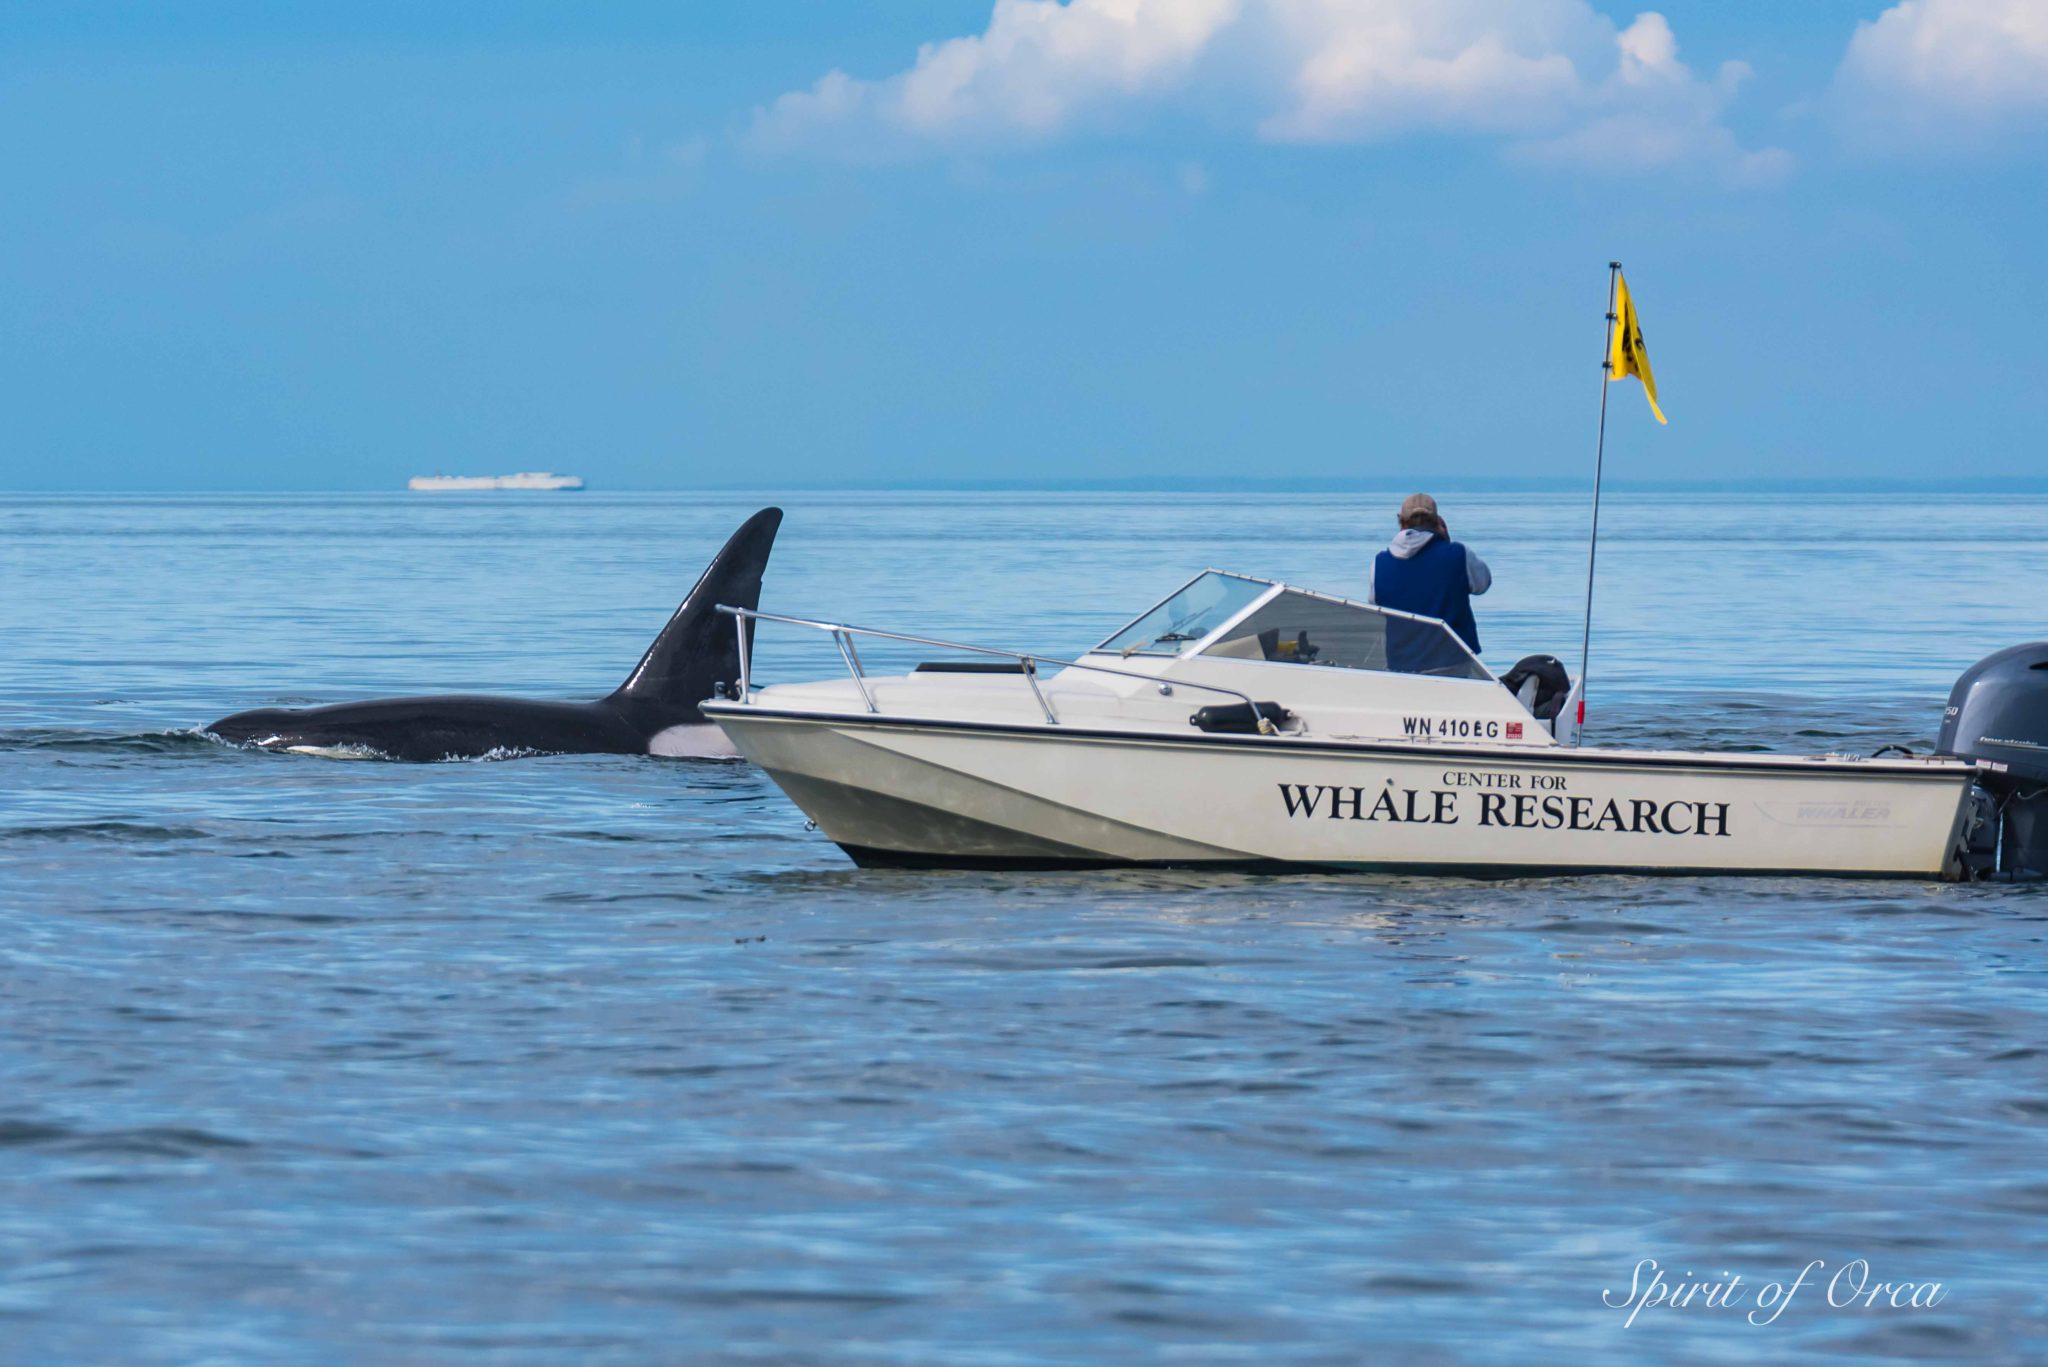 Center for Whale Research doing their thing